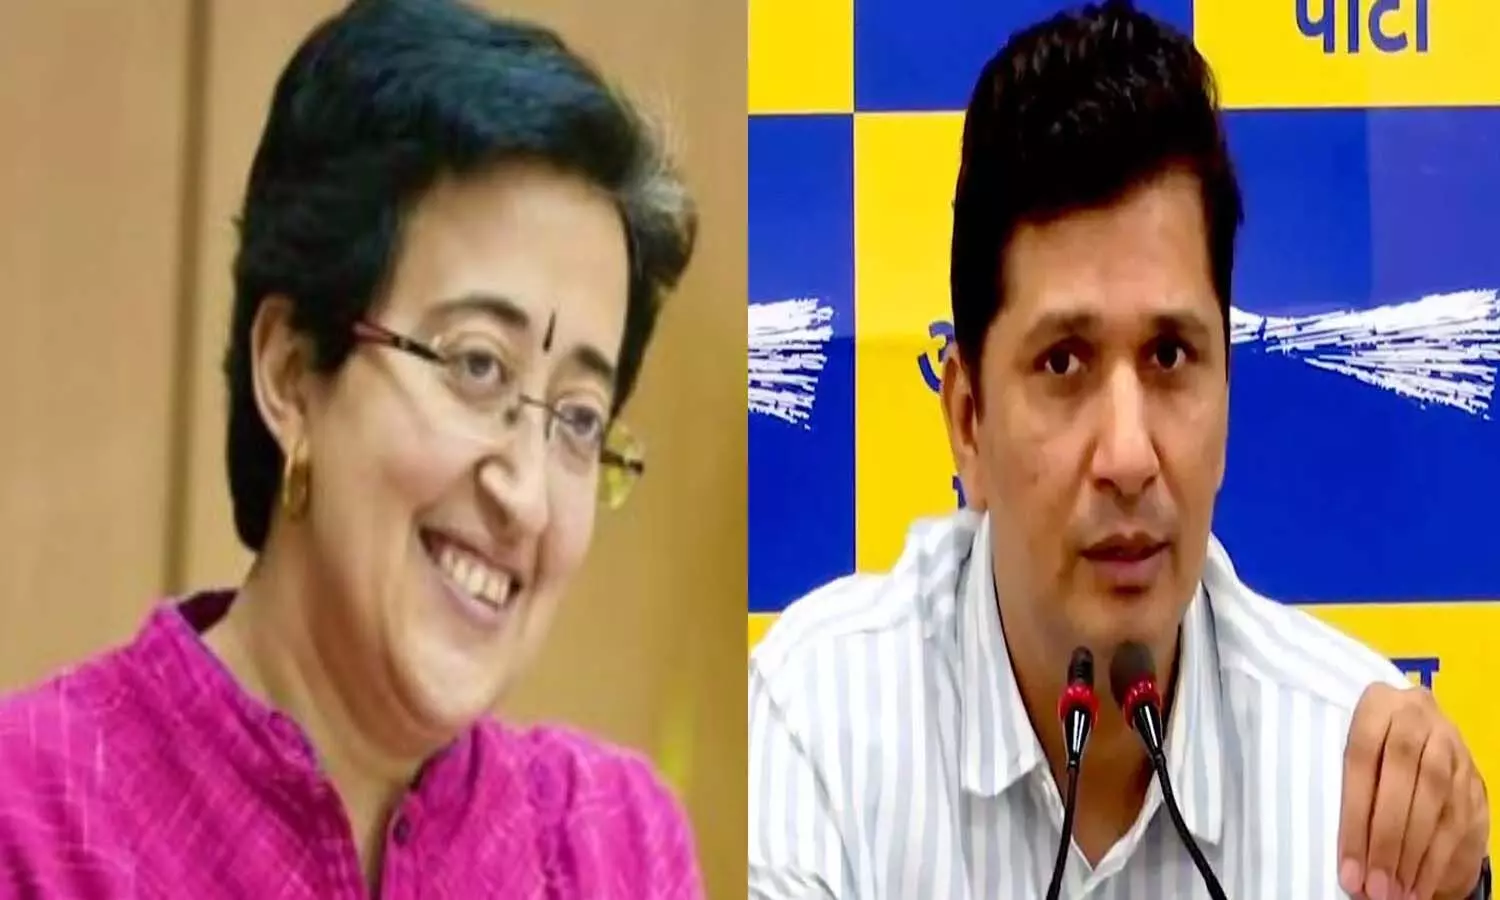 AAP MLAs Atishi and Saurabh Bhardwaj will take oath as ministers today, know how their political journey has been